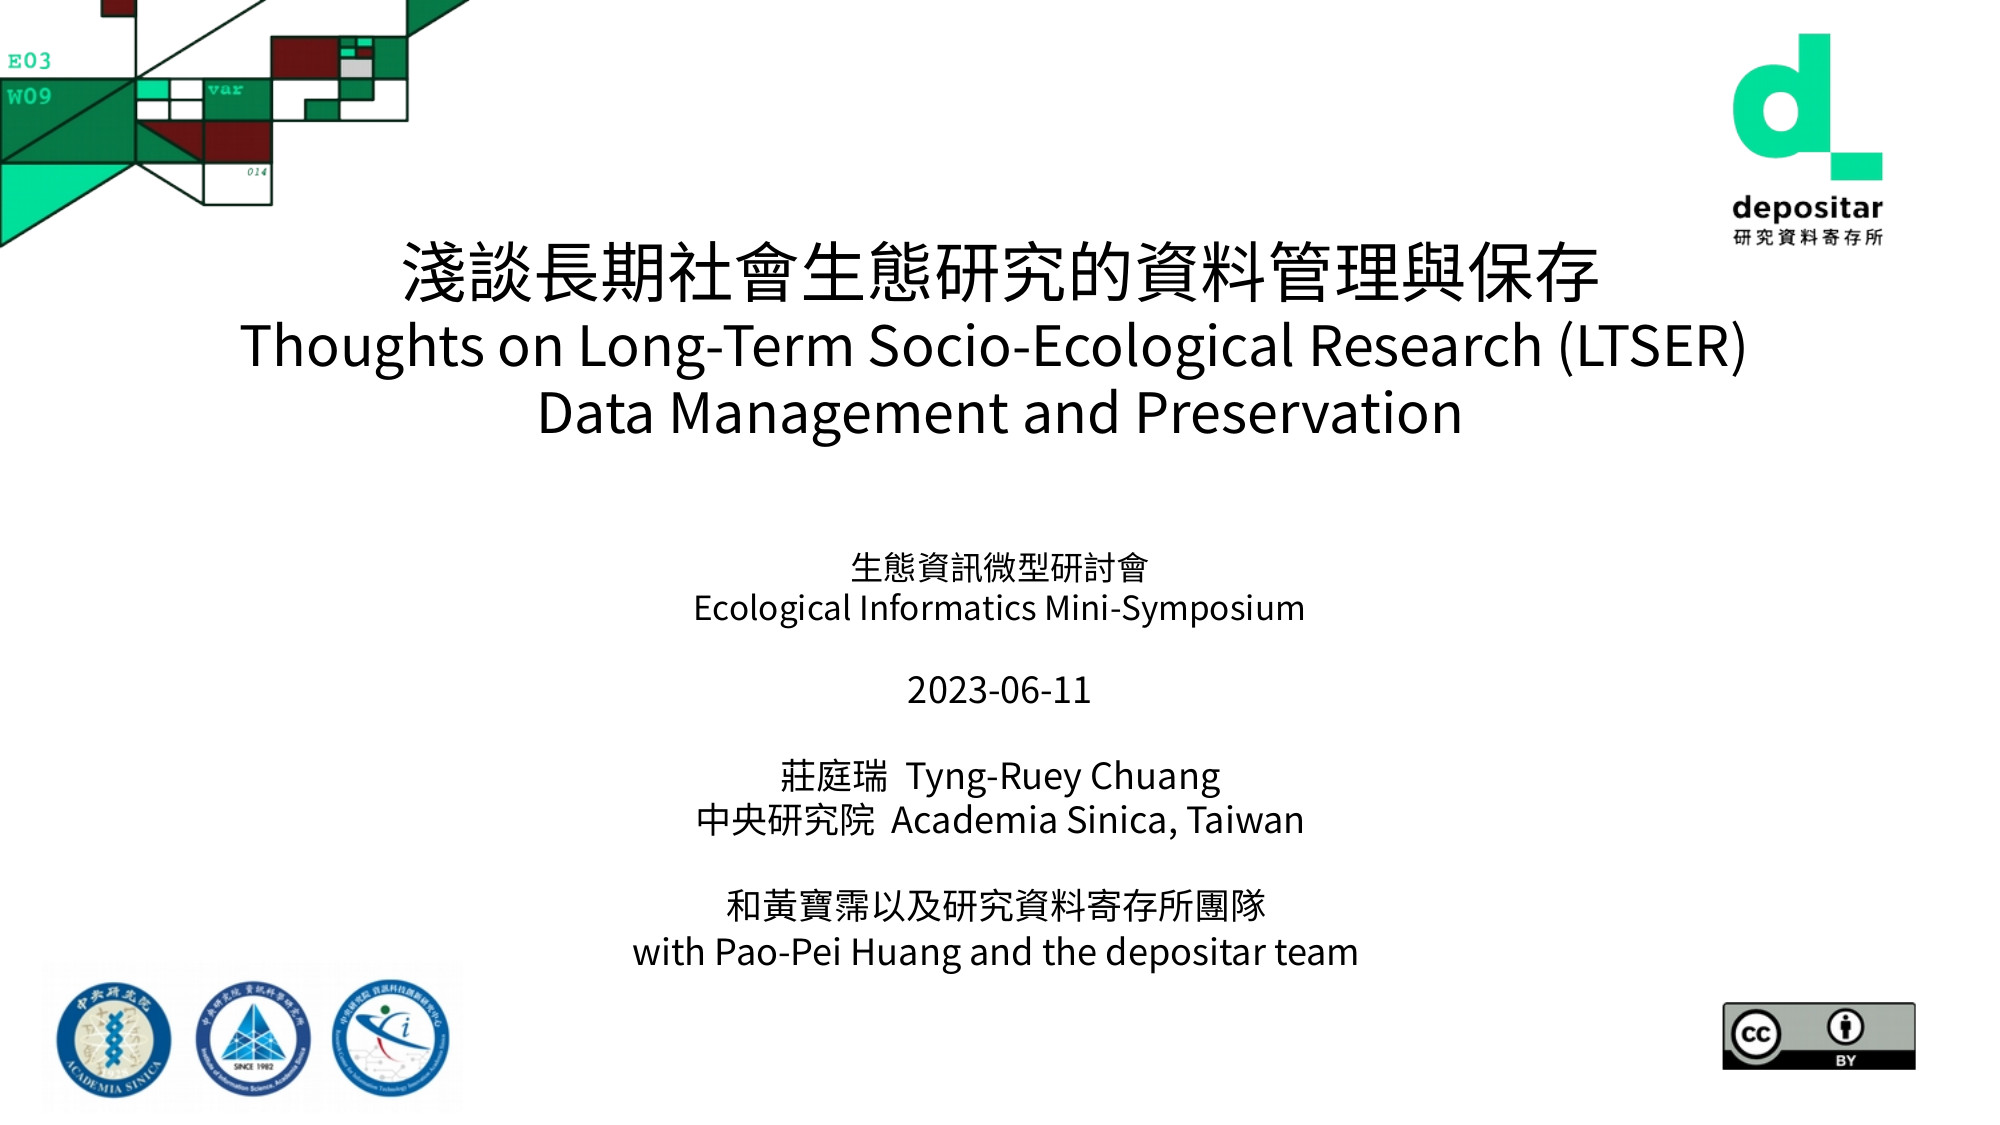 Thoughts on Long-Term Socio-Ecological Research (LTSER) Data Management and Preservation